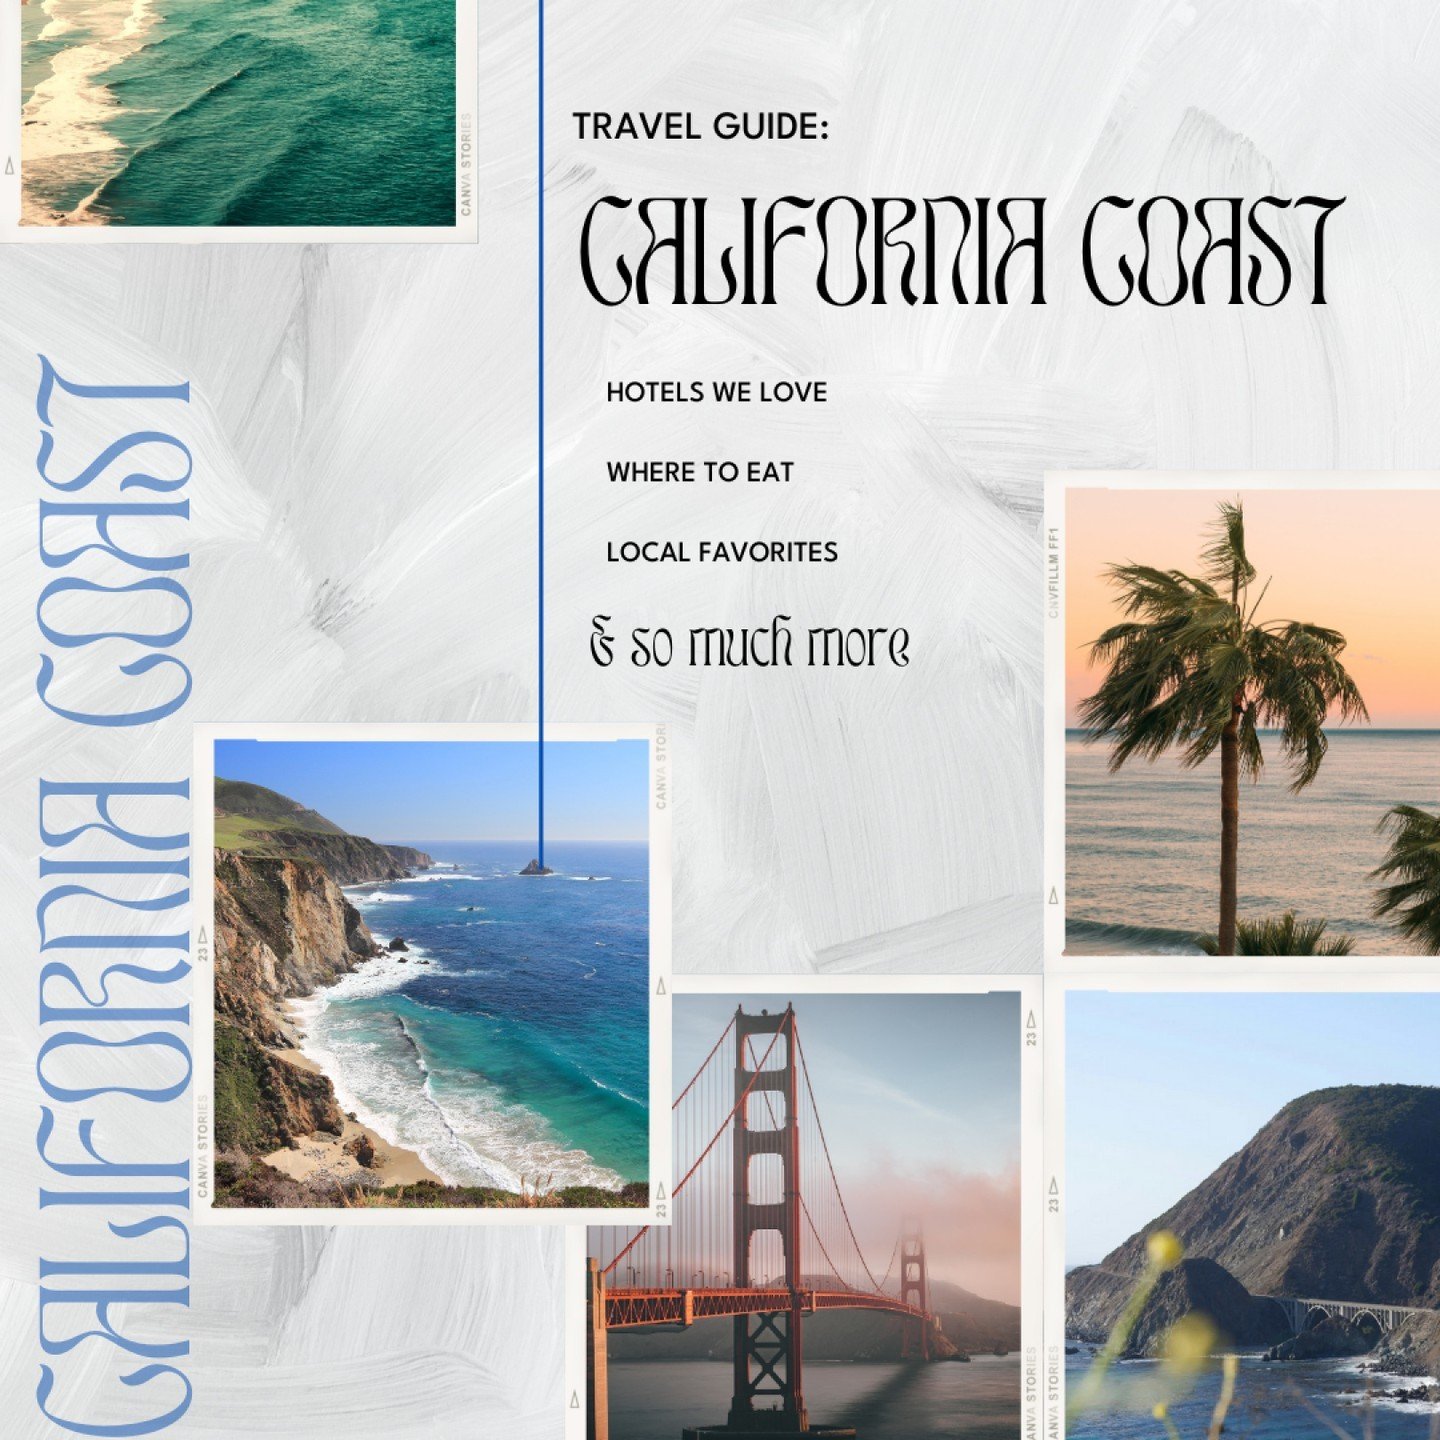 Ready for a coastal adventure? Our ultimate California Coast travel guide has everything you need to plan an unforgettable road trip! 

Here's your guide on where to stay:
@1hotel.weho
@shuttersca
@santamonicaproper

Fill out the inquiry form in my b